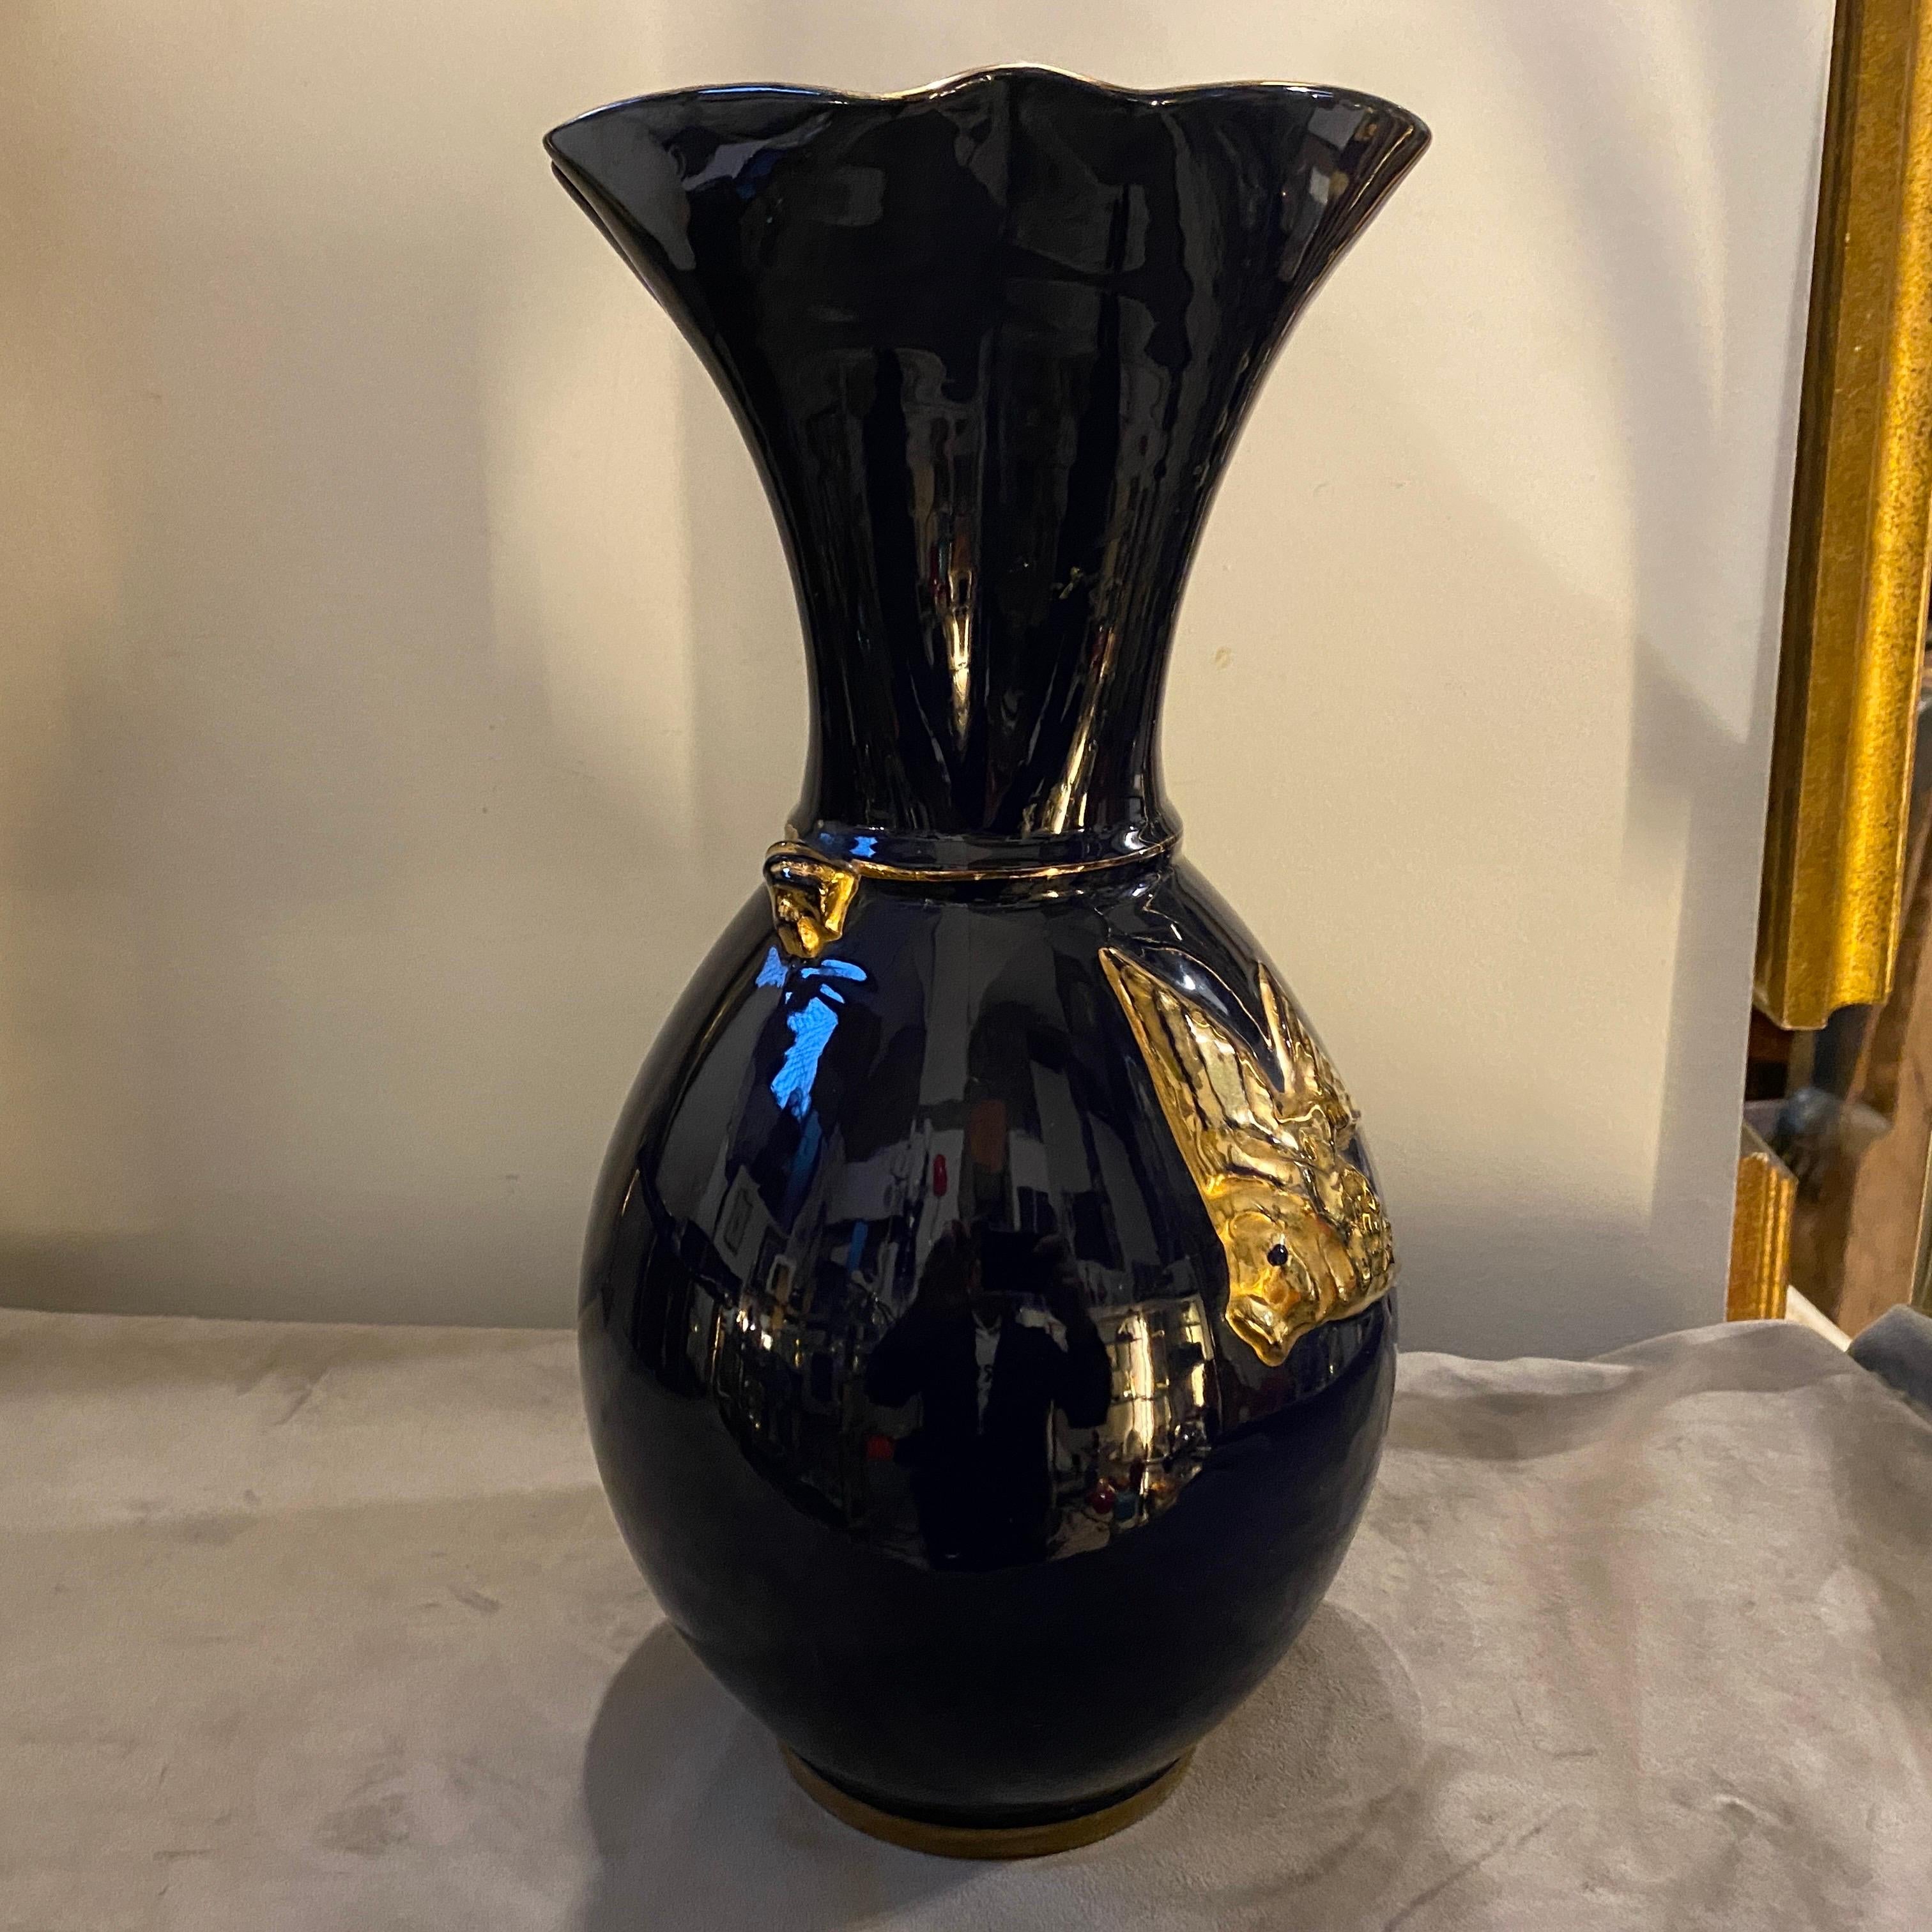 1950s Mid-Century Modern Blue and Gold Ceramic Italian Vase by Icap For Sale 2